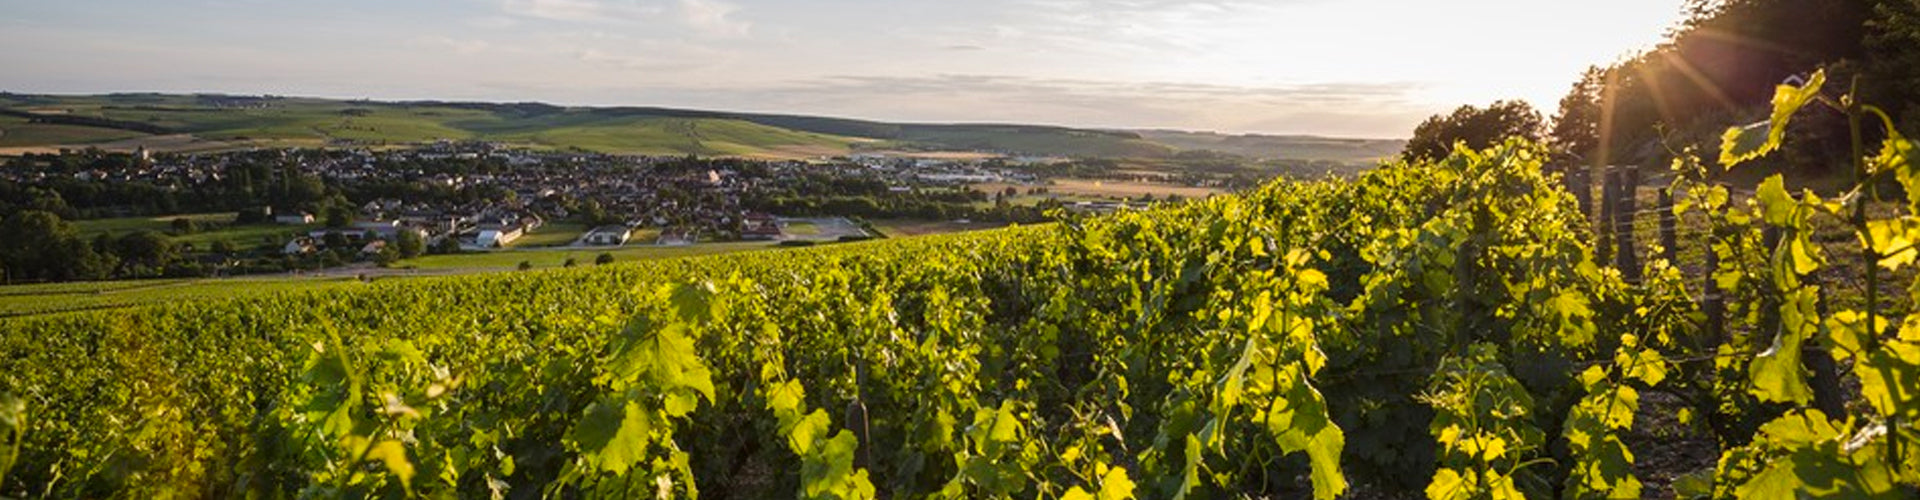 A view of Chablis from vineyards